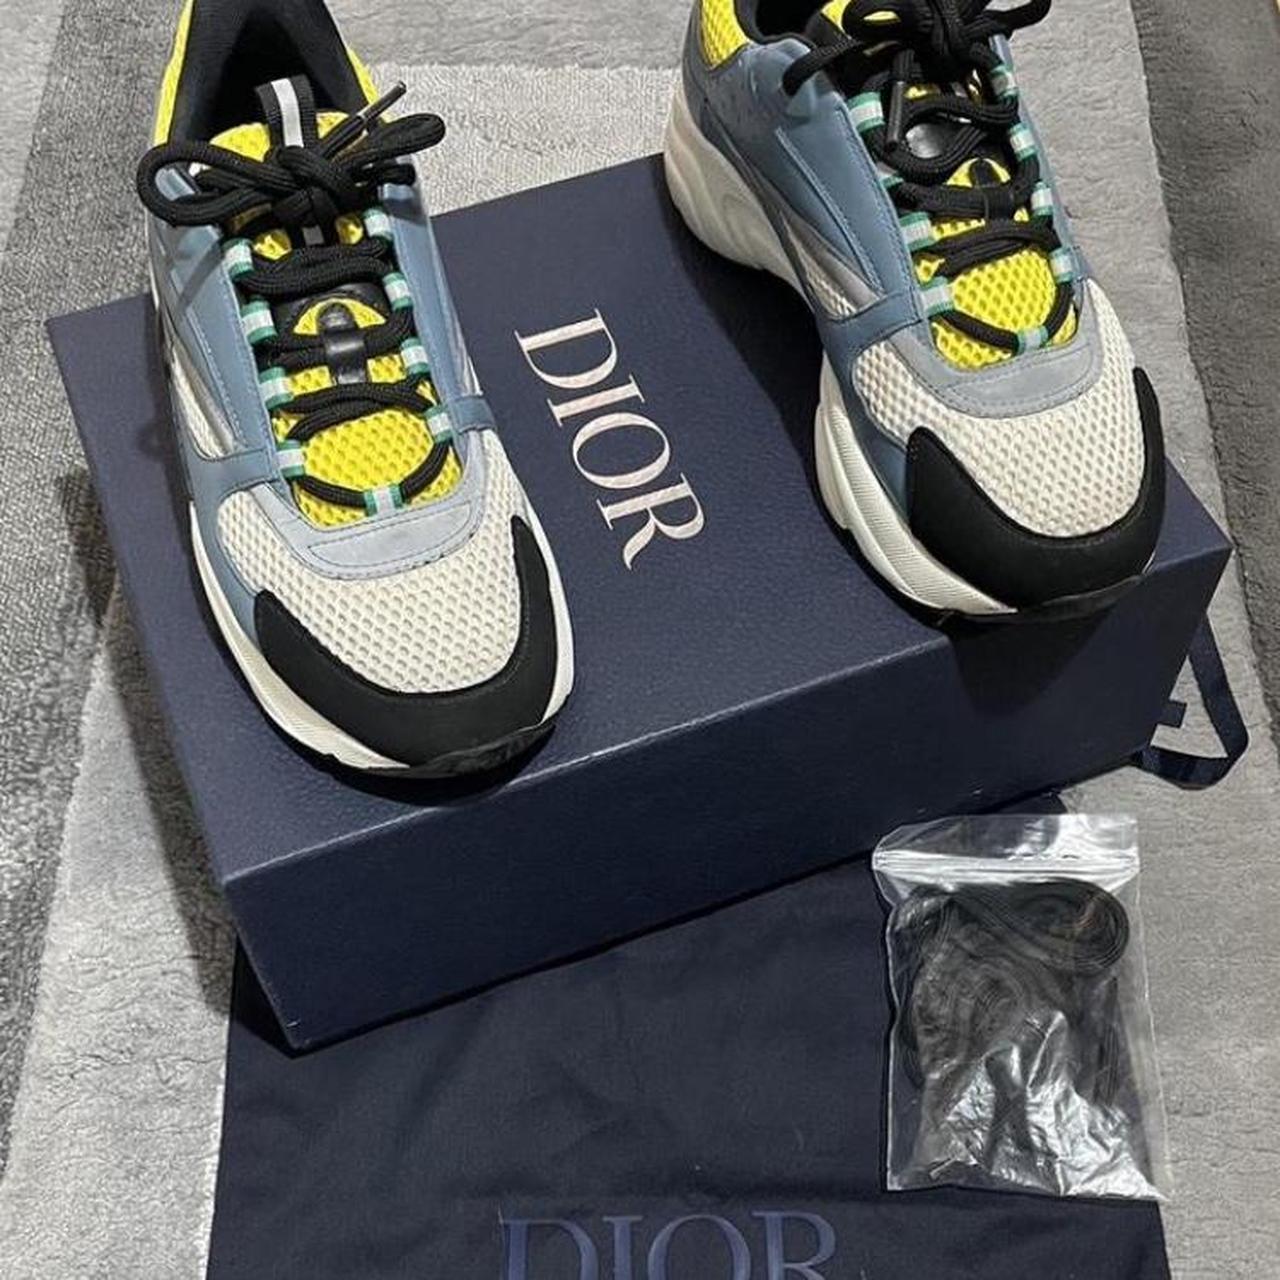 Dior b22s Size 7uk 100% authentic Too small for... - Depop